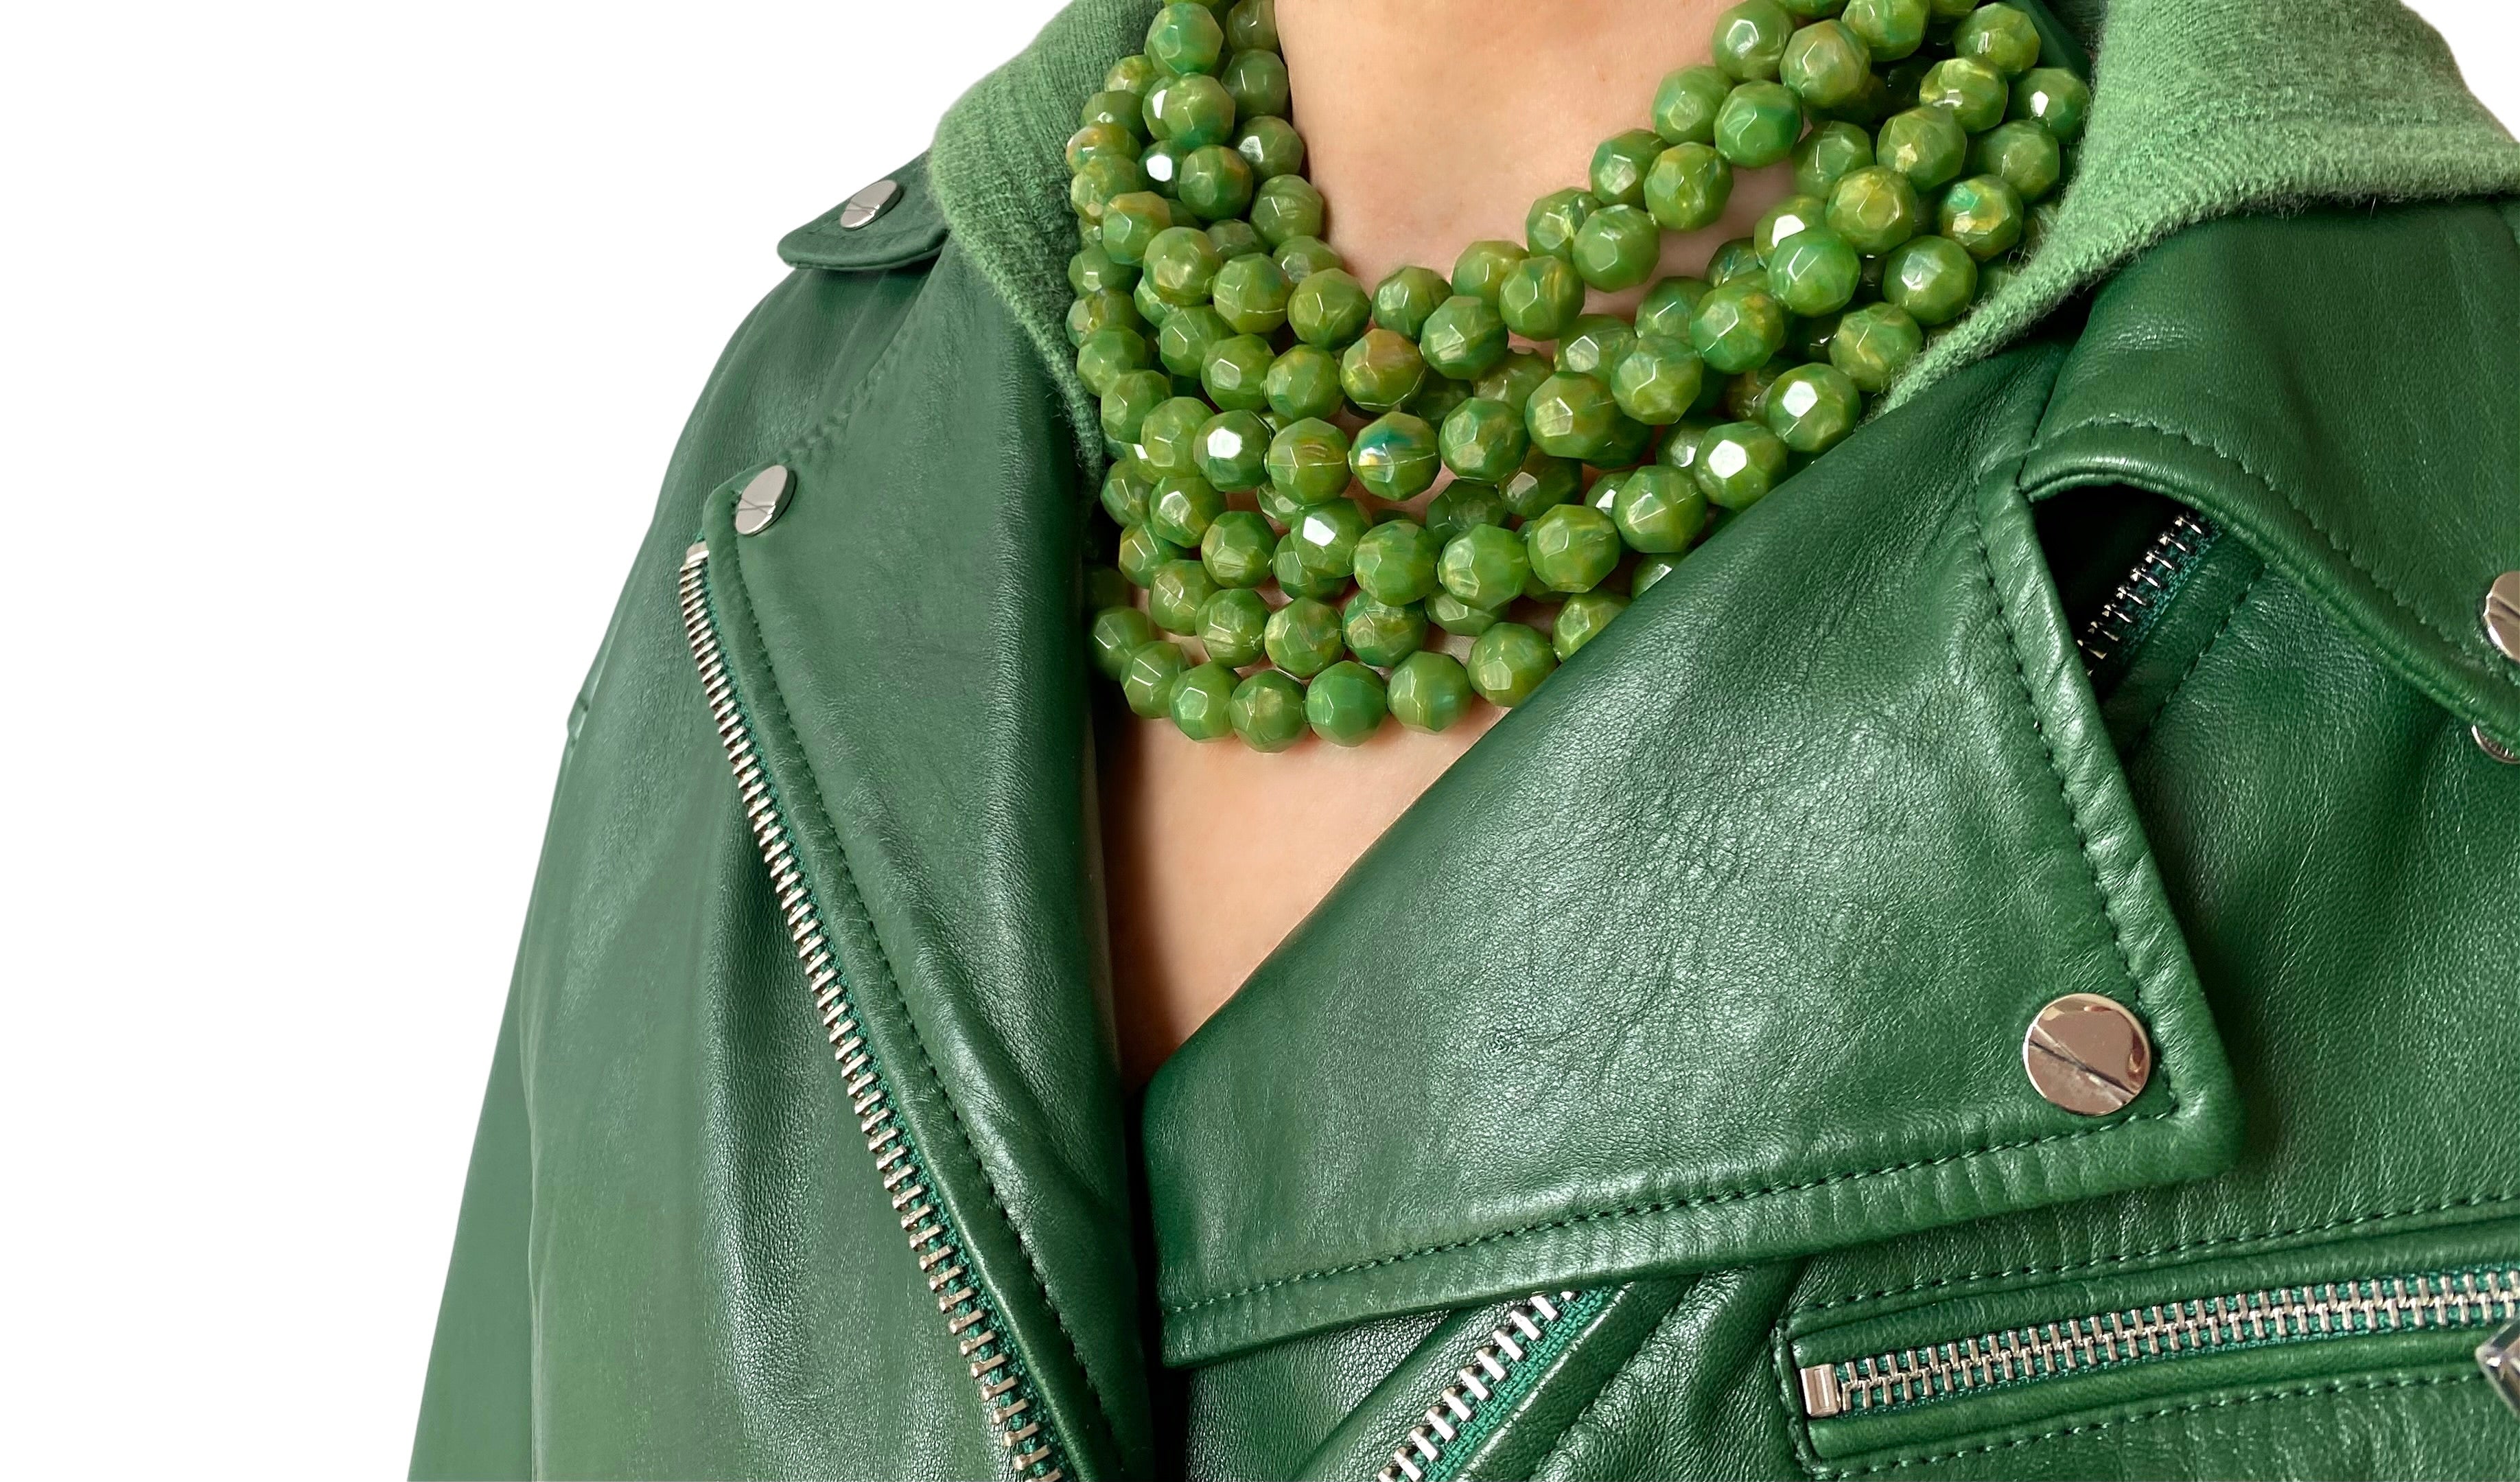 Meadow Green Necklace